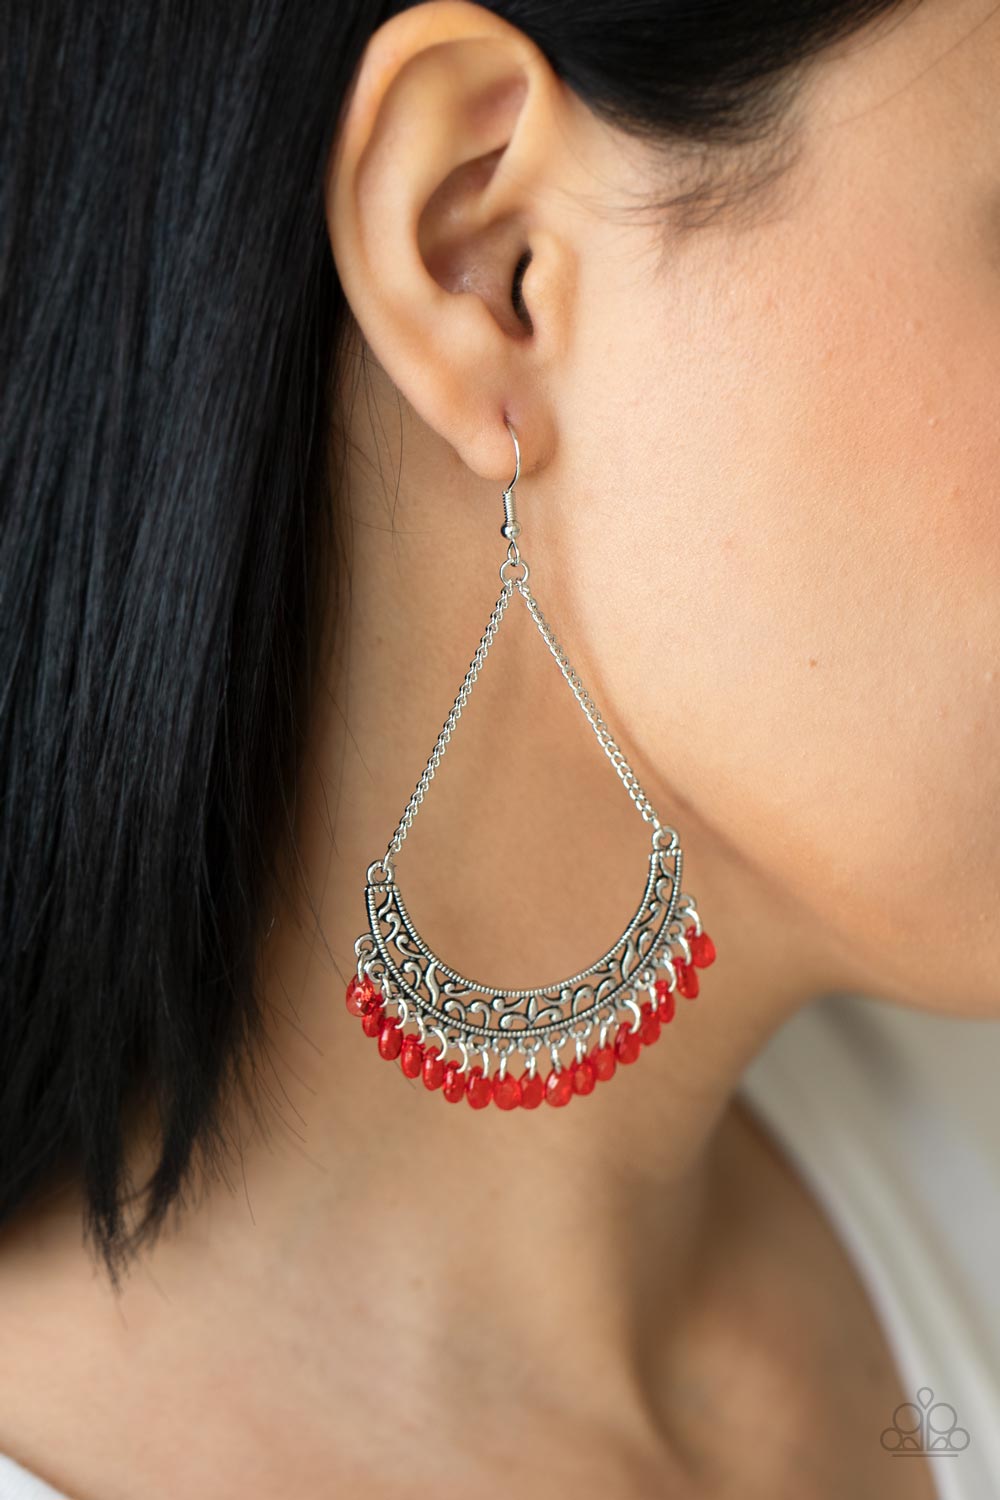 Orchard Odyssey Red
Earrings Paparazzi